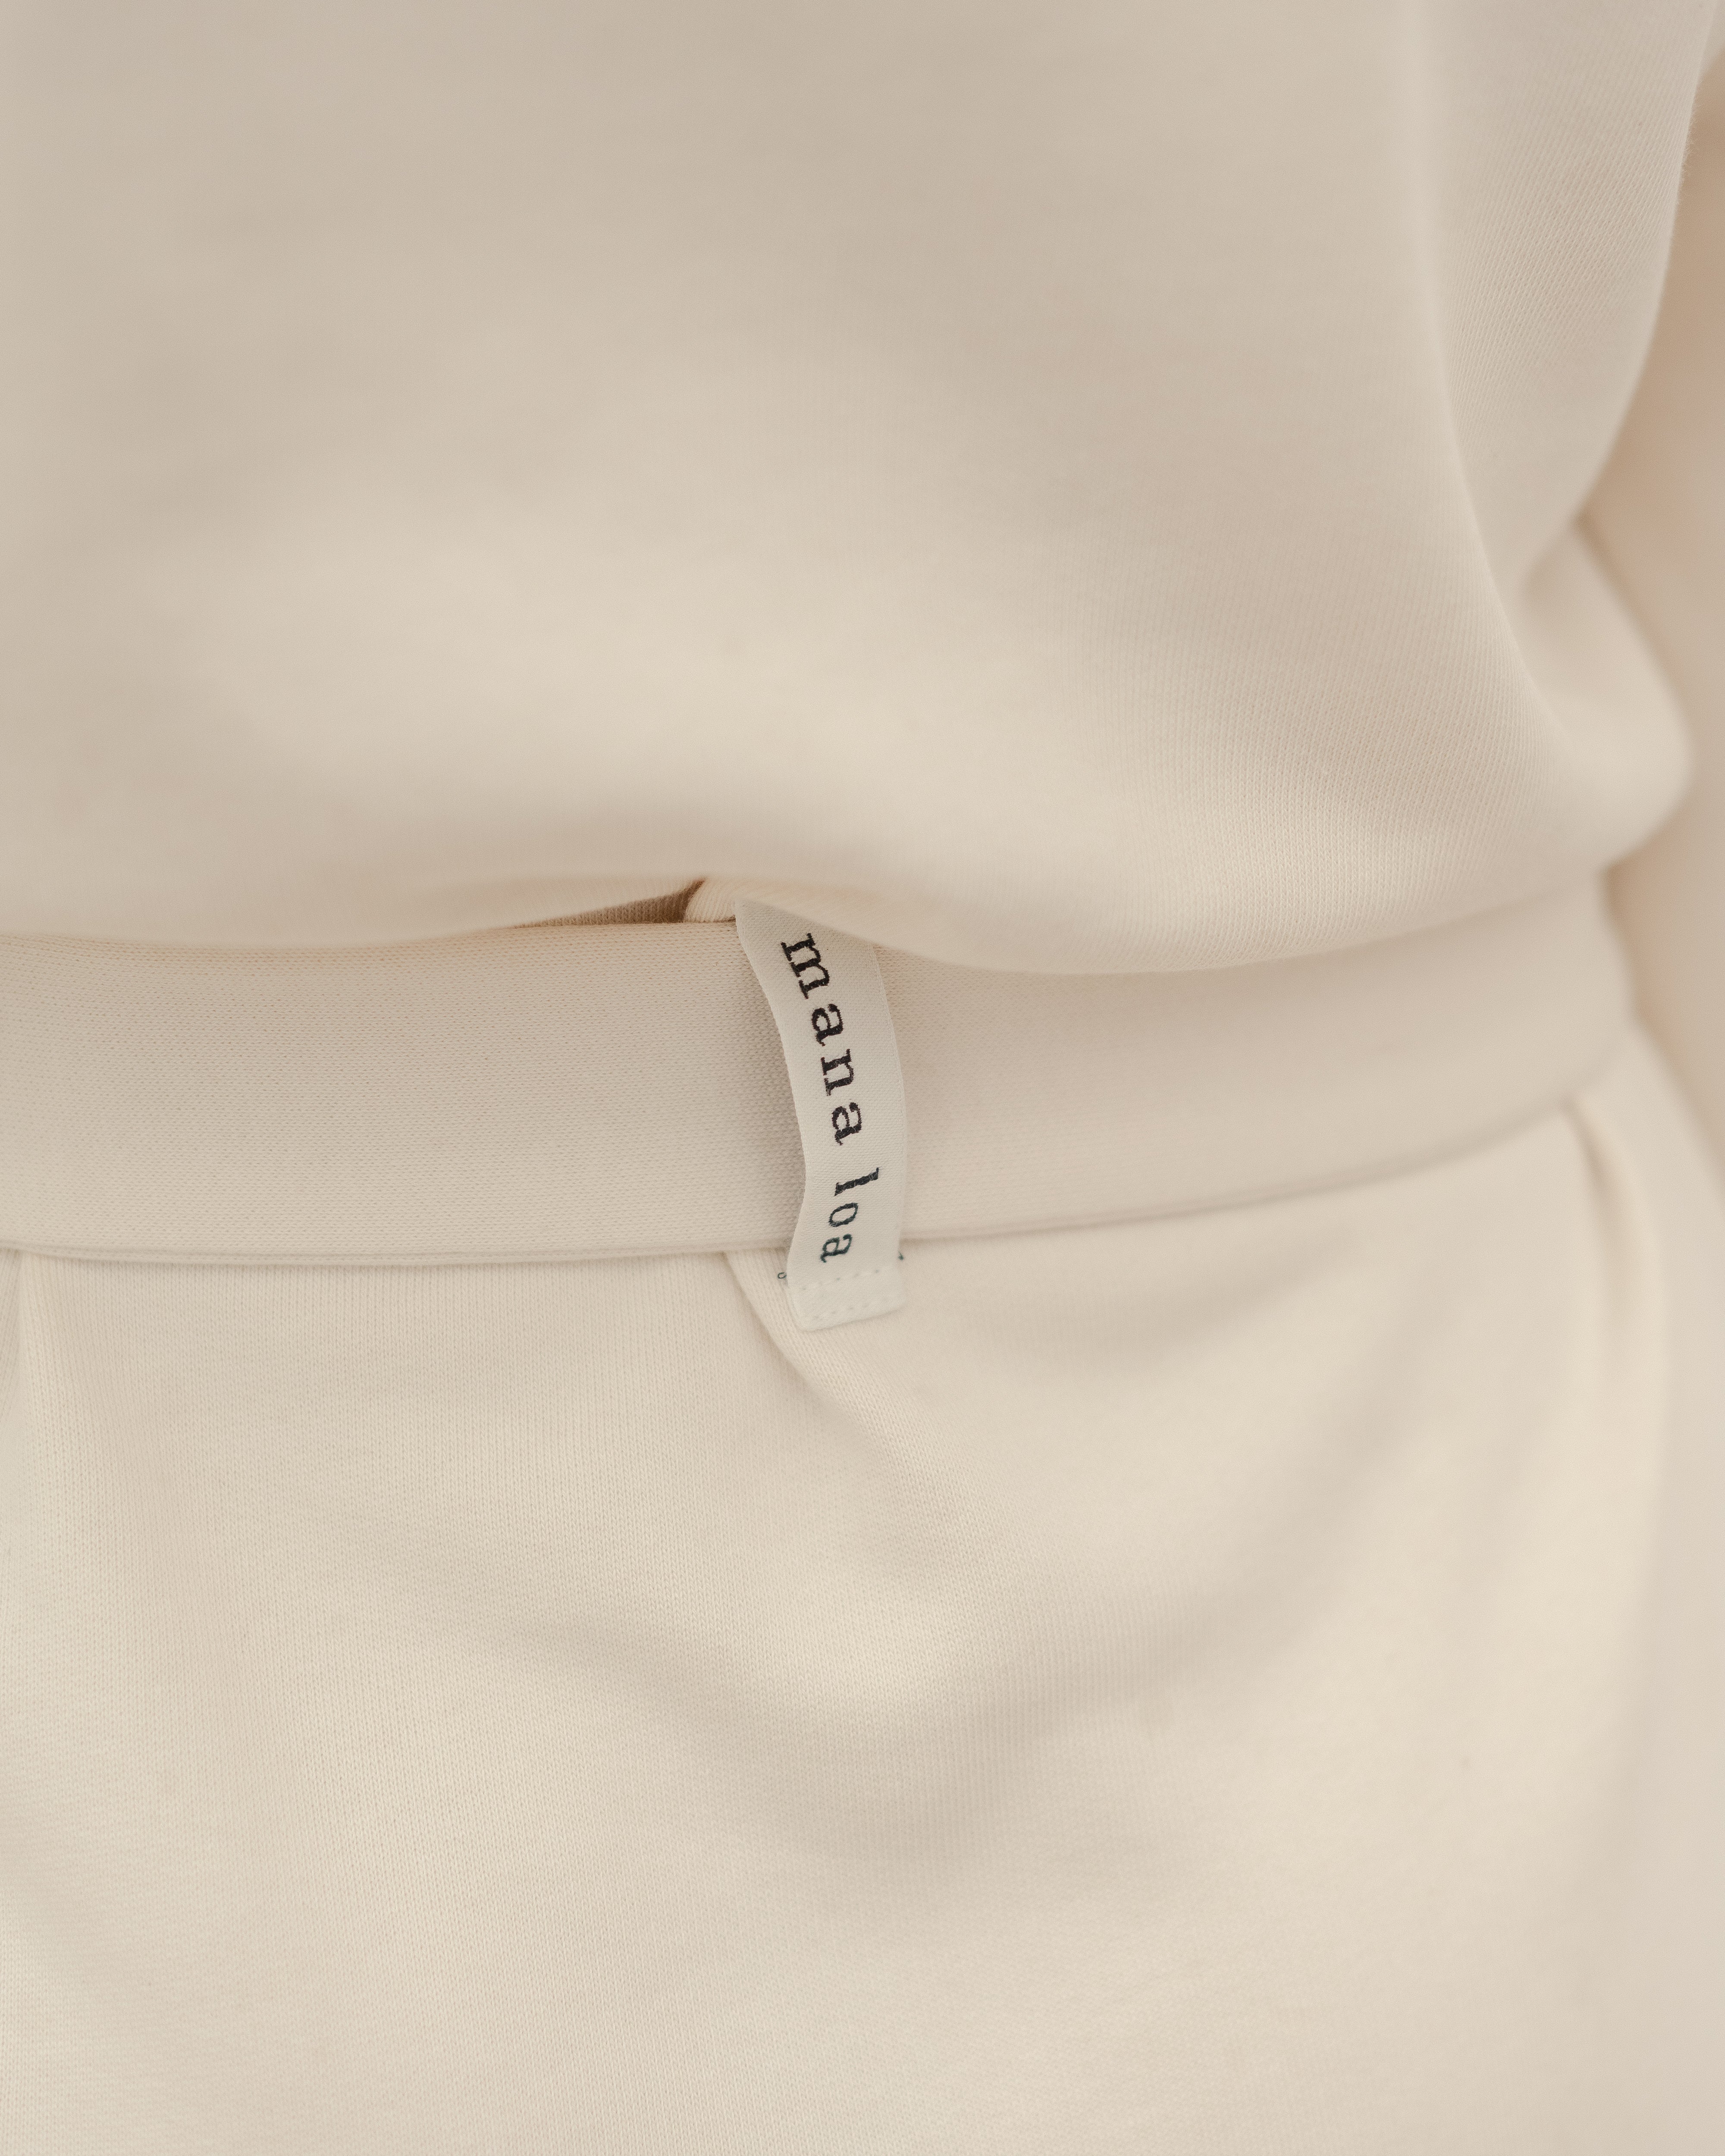 Detail of the back of a sweatshirt dress in ecru with belt and mana loa label, made of organic cotton.